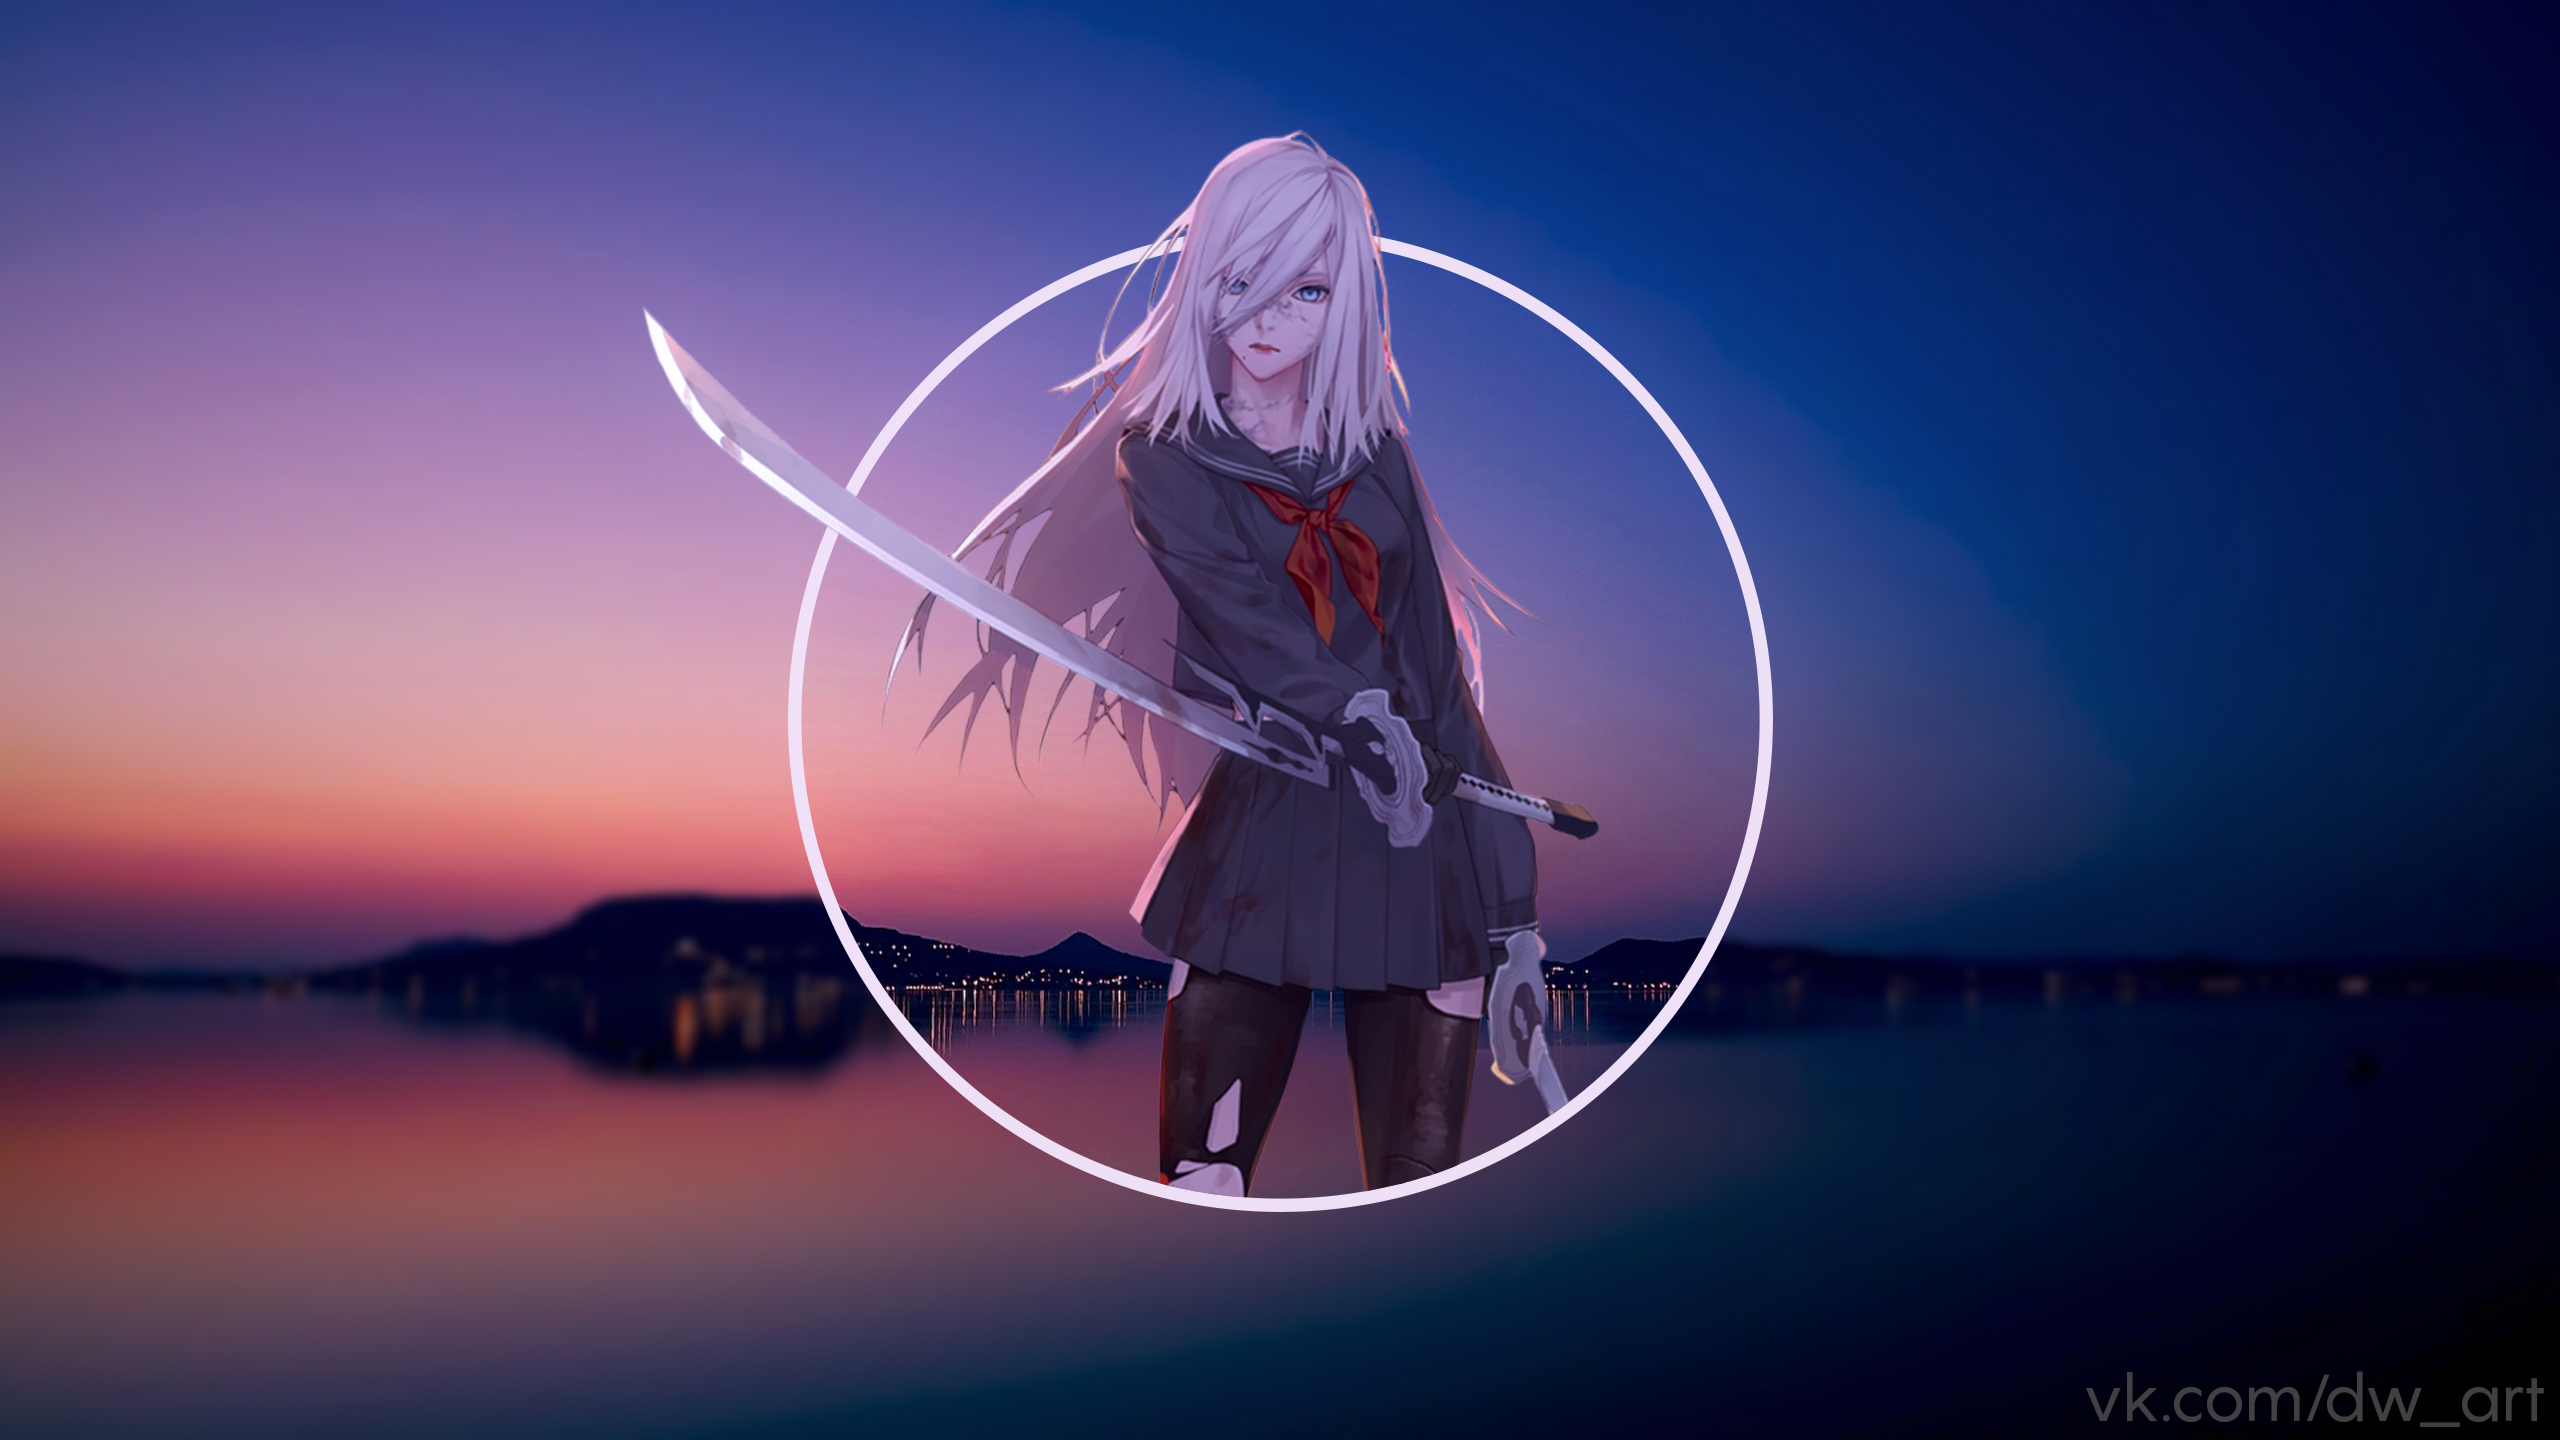 A2 NieR Nier Automata Anime Girls Sunset Piture In Picture Picture In Picture 2560x1440